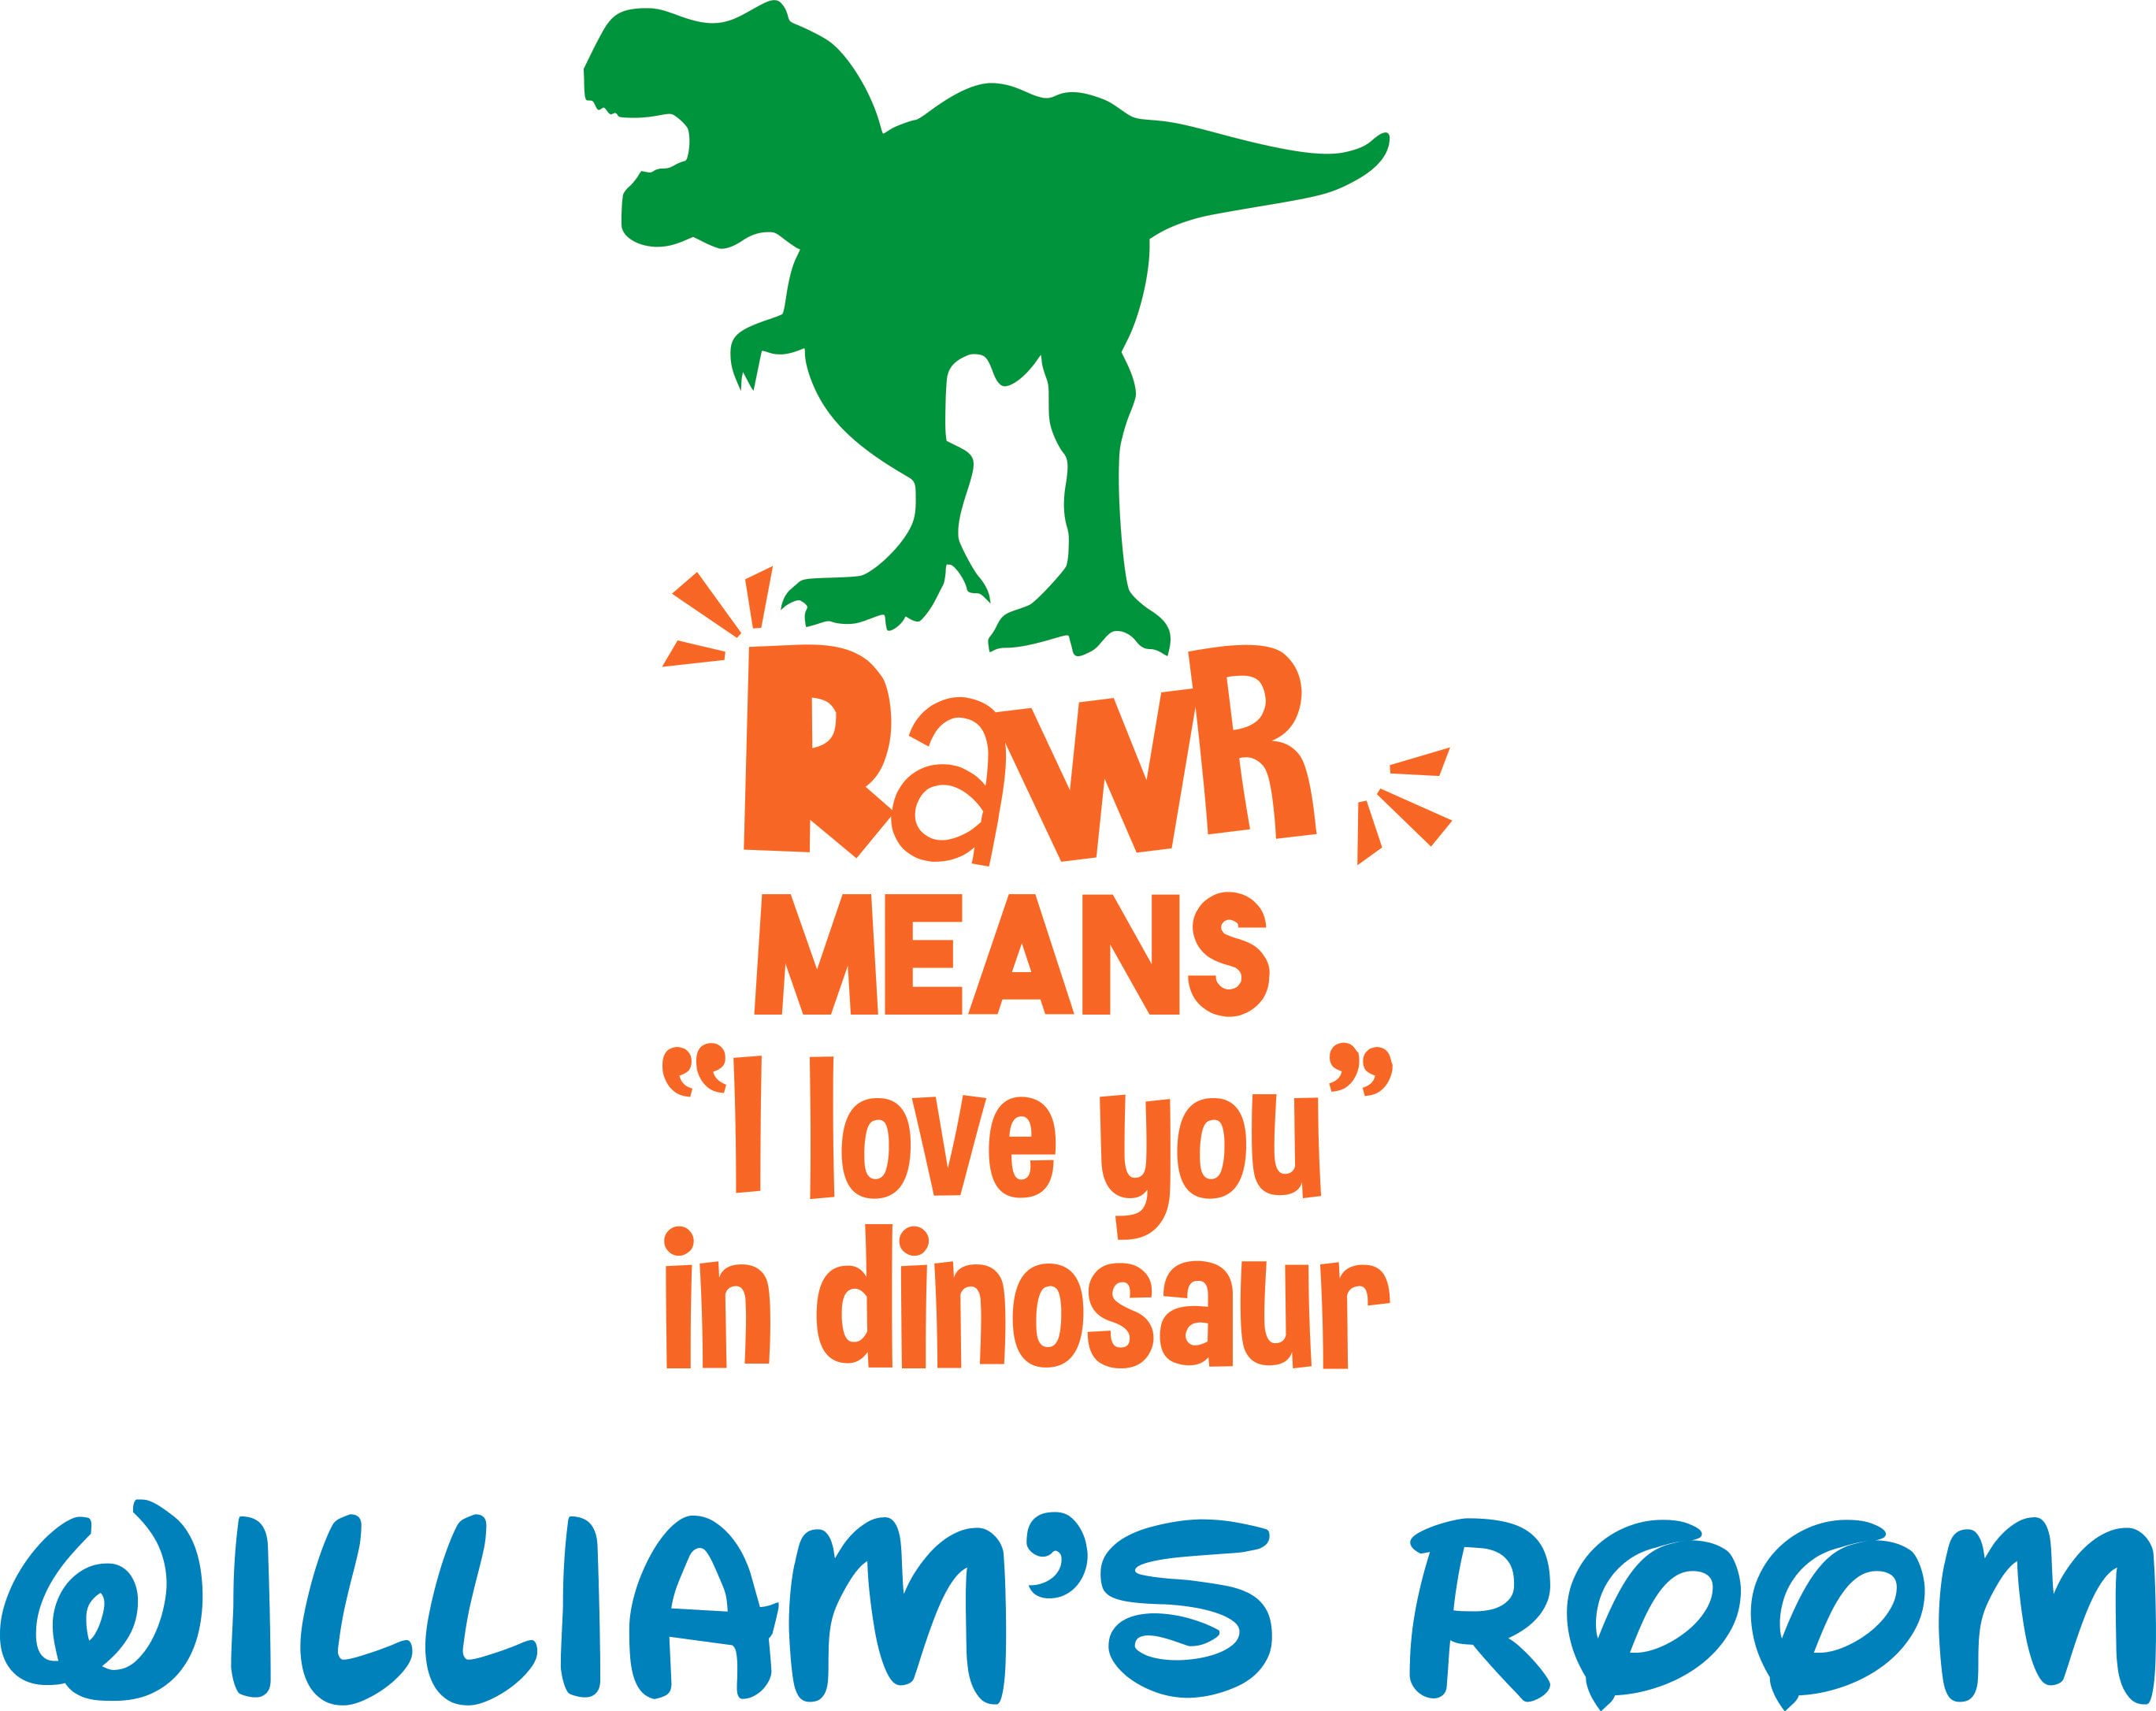 Boys Quote Wall Sticker Vinyl Transfer "Roar Means i Love You". Decor Art Decal 